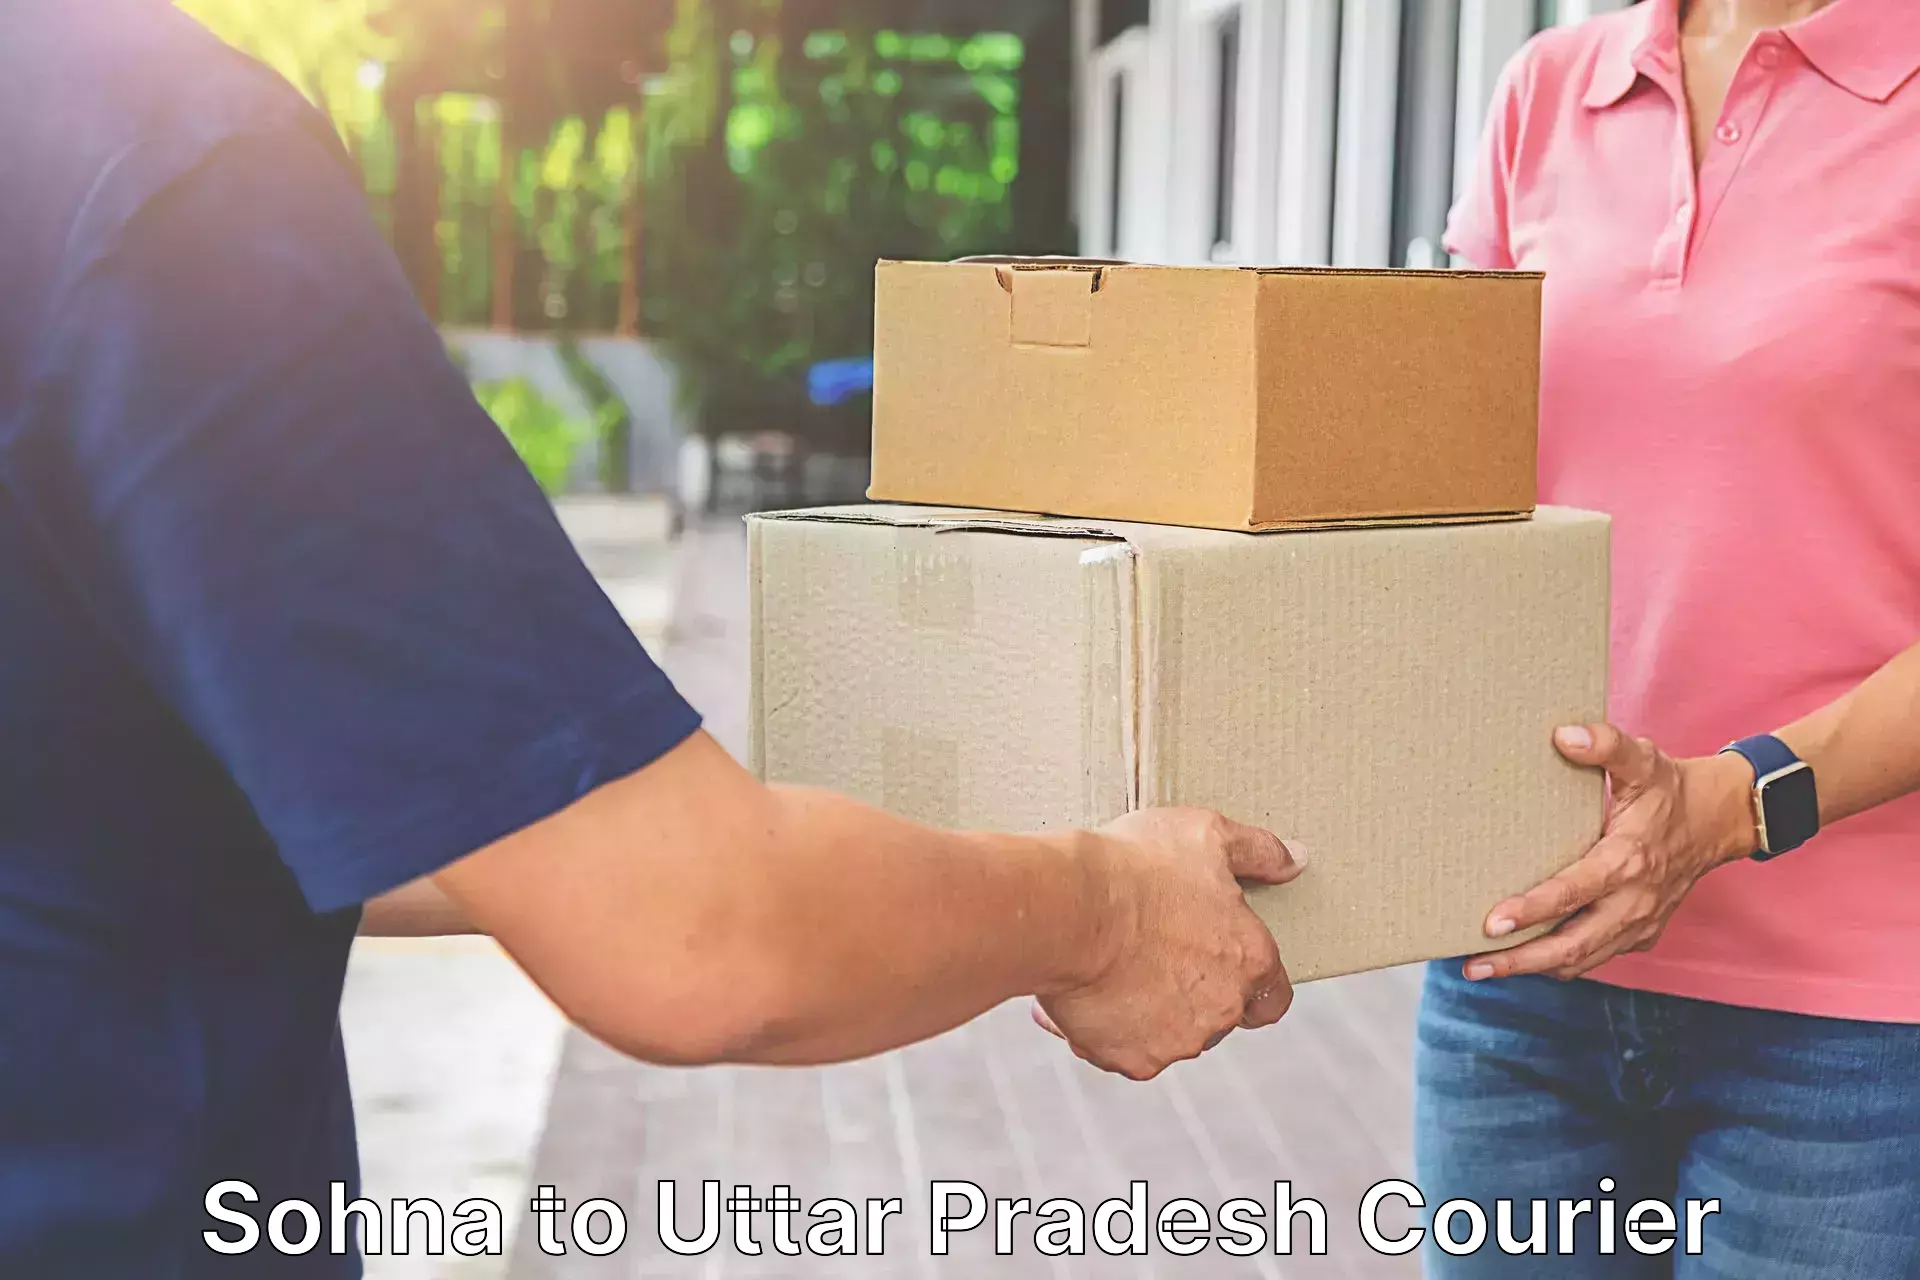 Affordable parcel service Sohna to Kanpur